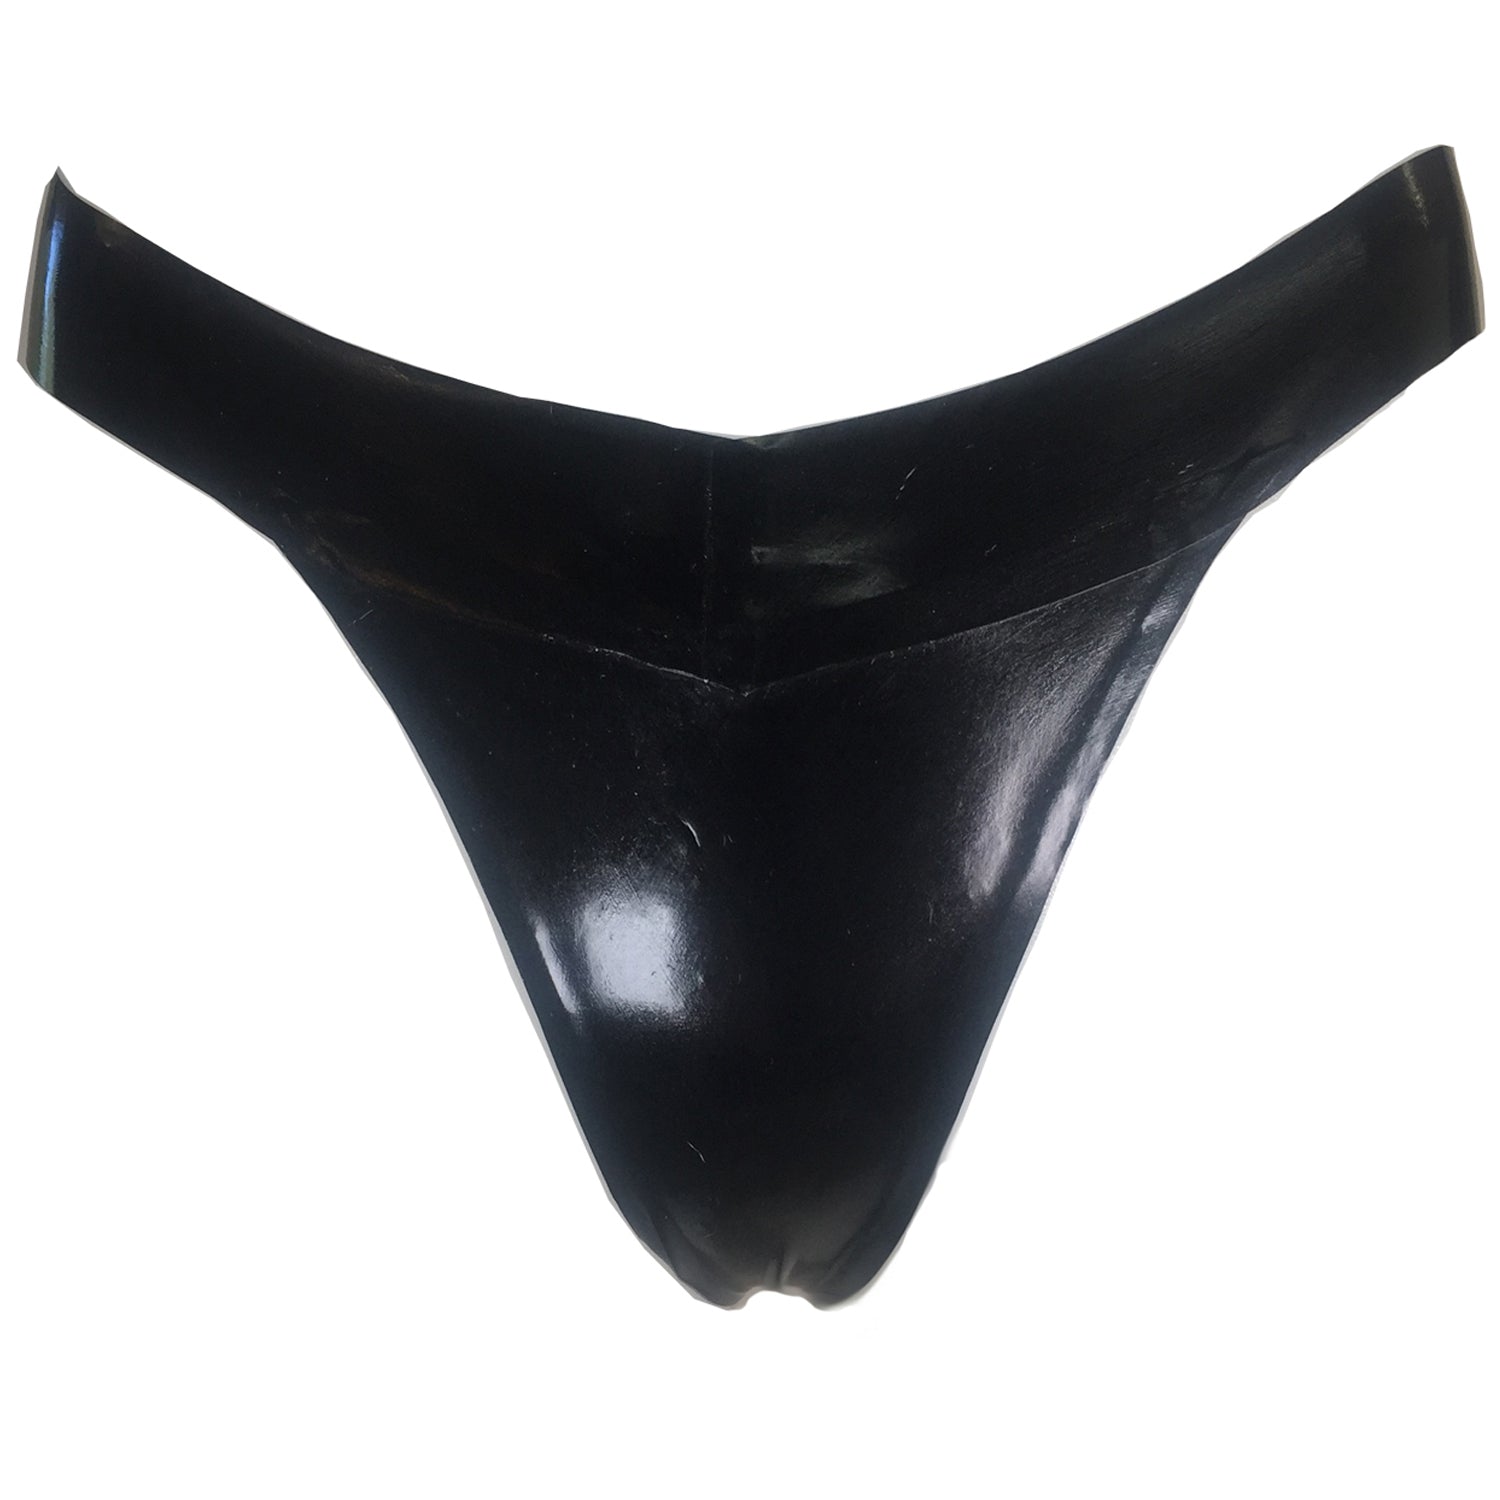 Latex Thong - Rubber G-Sting Pantie by Vex Clothing - Frontage